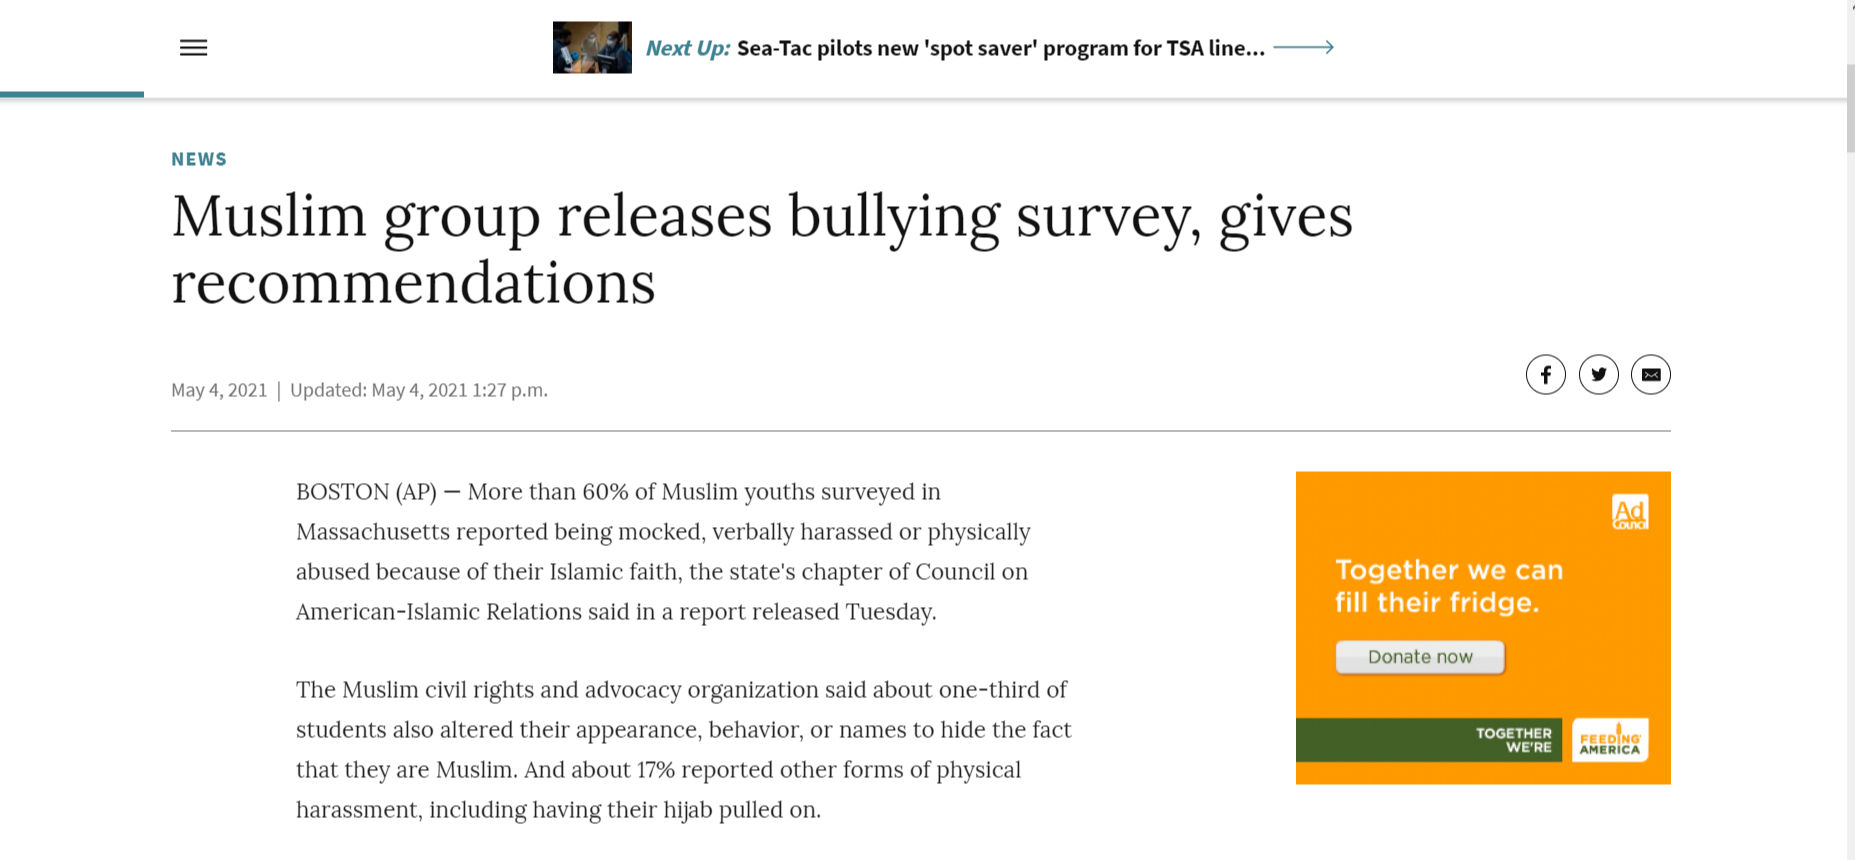 Muslim group releases bullying survey, gives recommendations